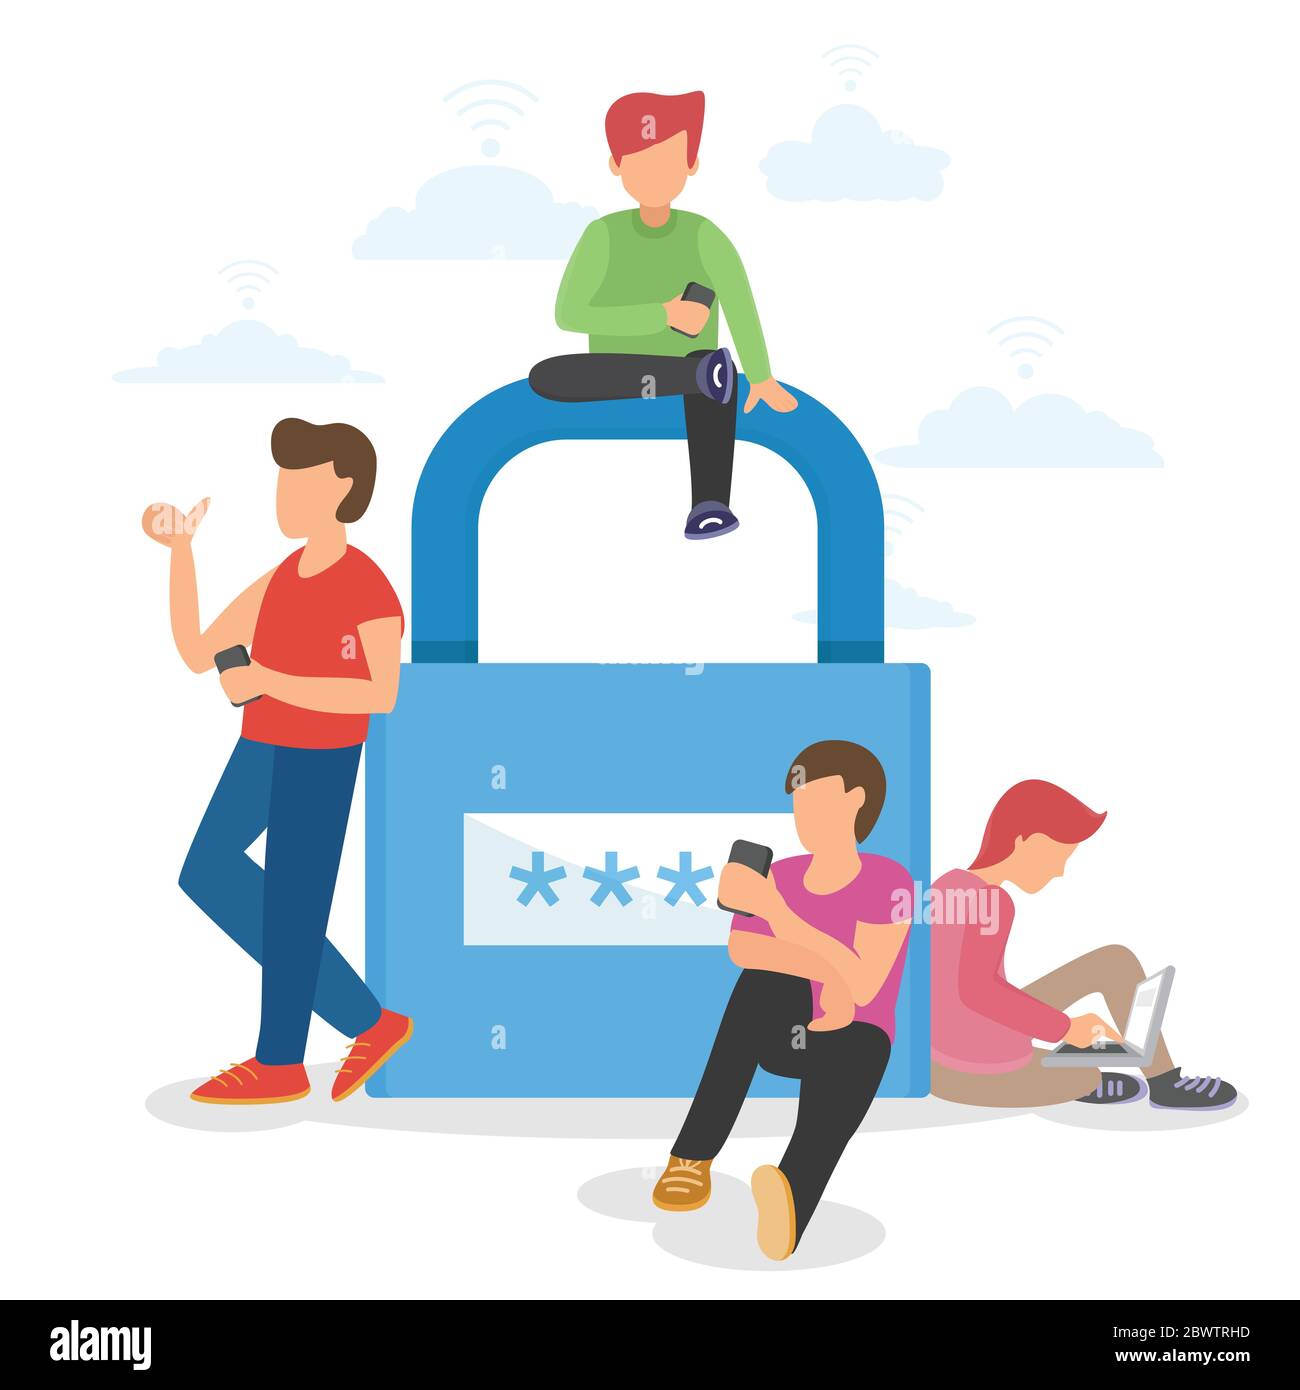 people and padlock for network security and encryption concept illustration Stock Vector